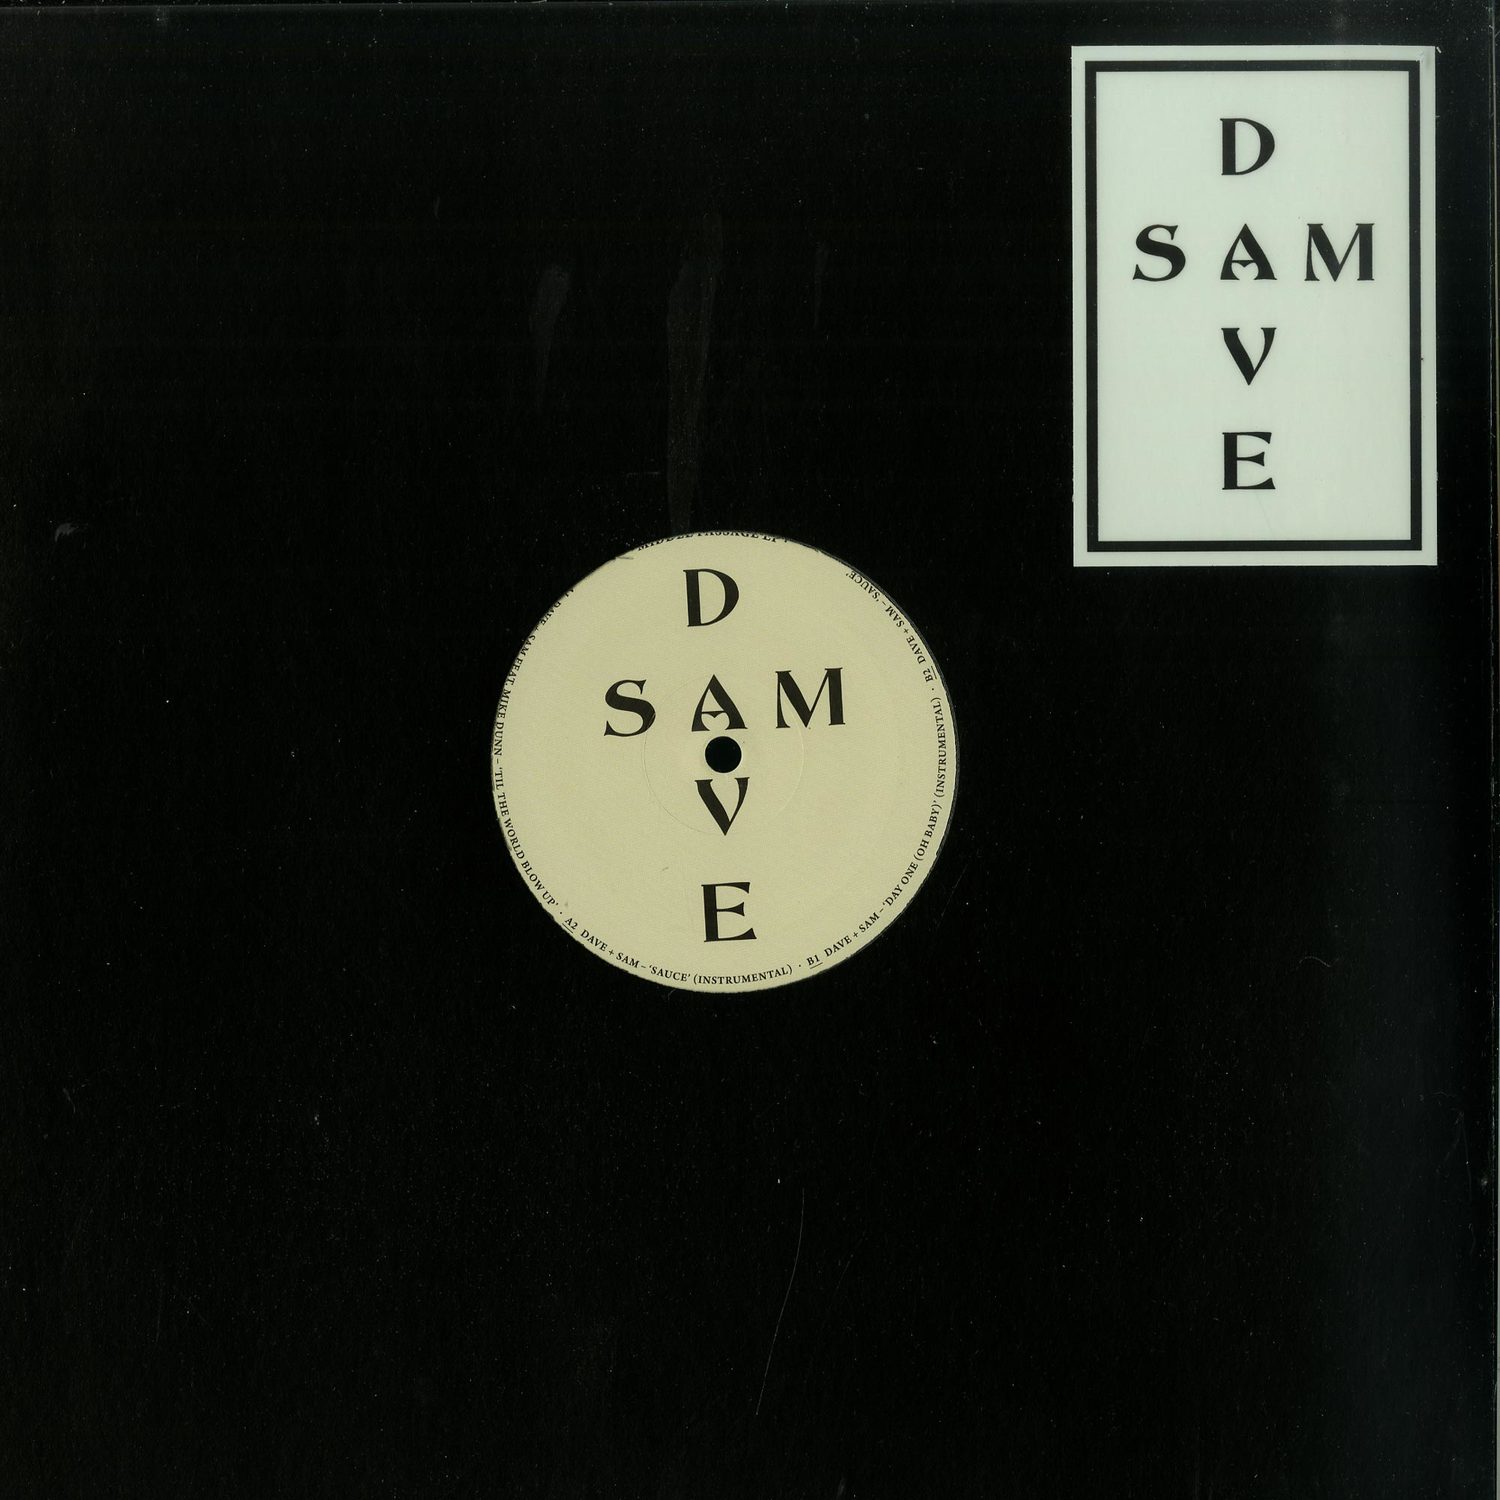 Dave + Sam - MIDDLE PASSAGE EP 